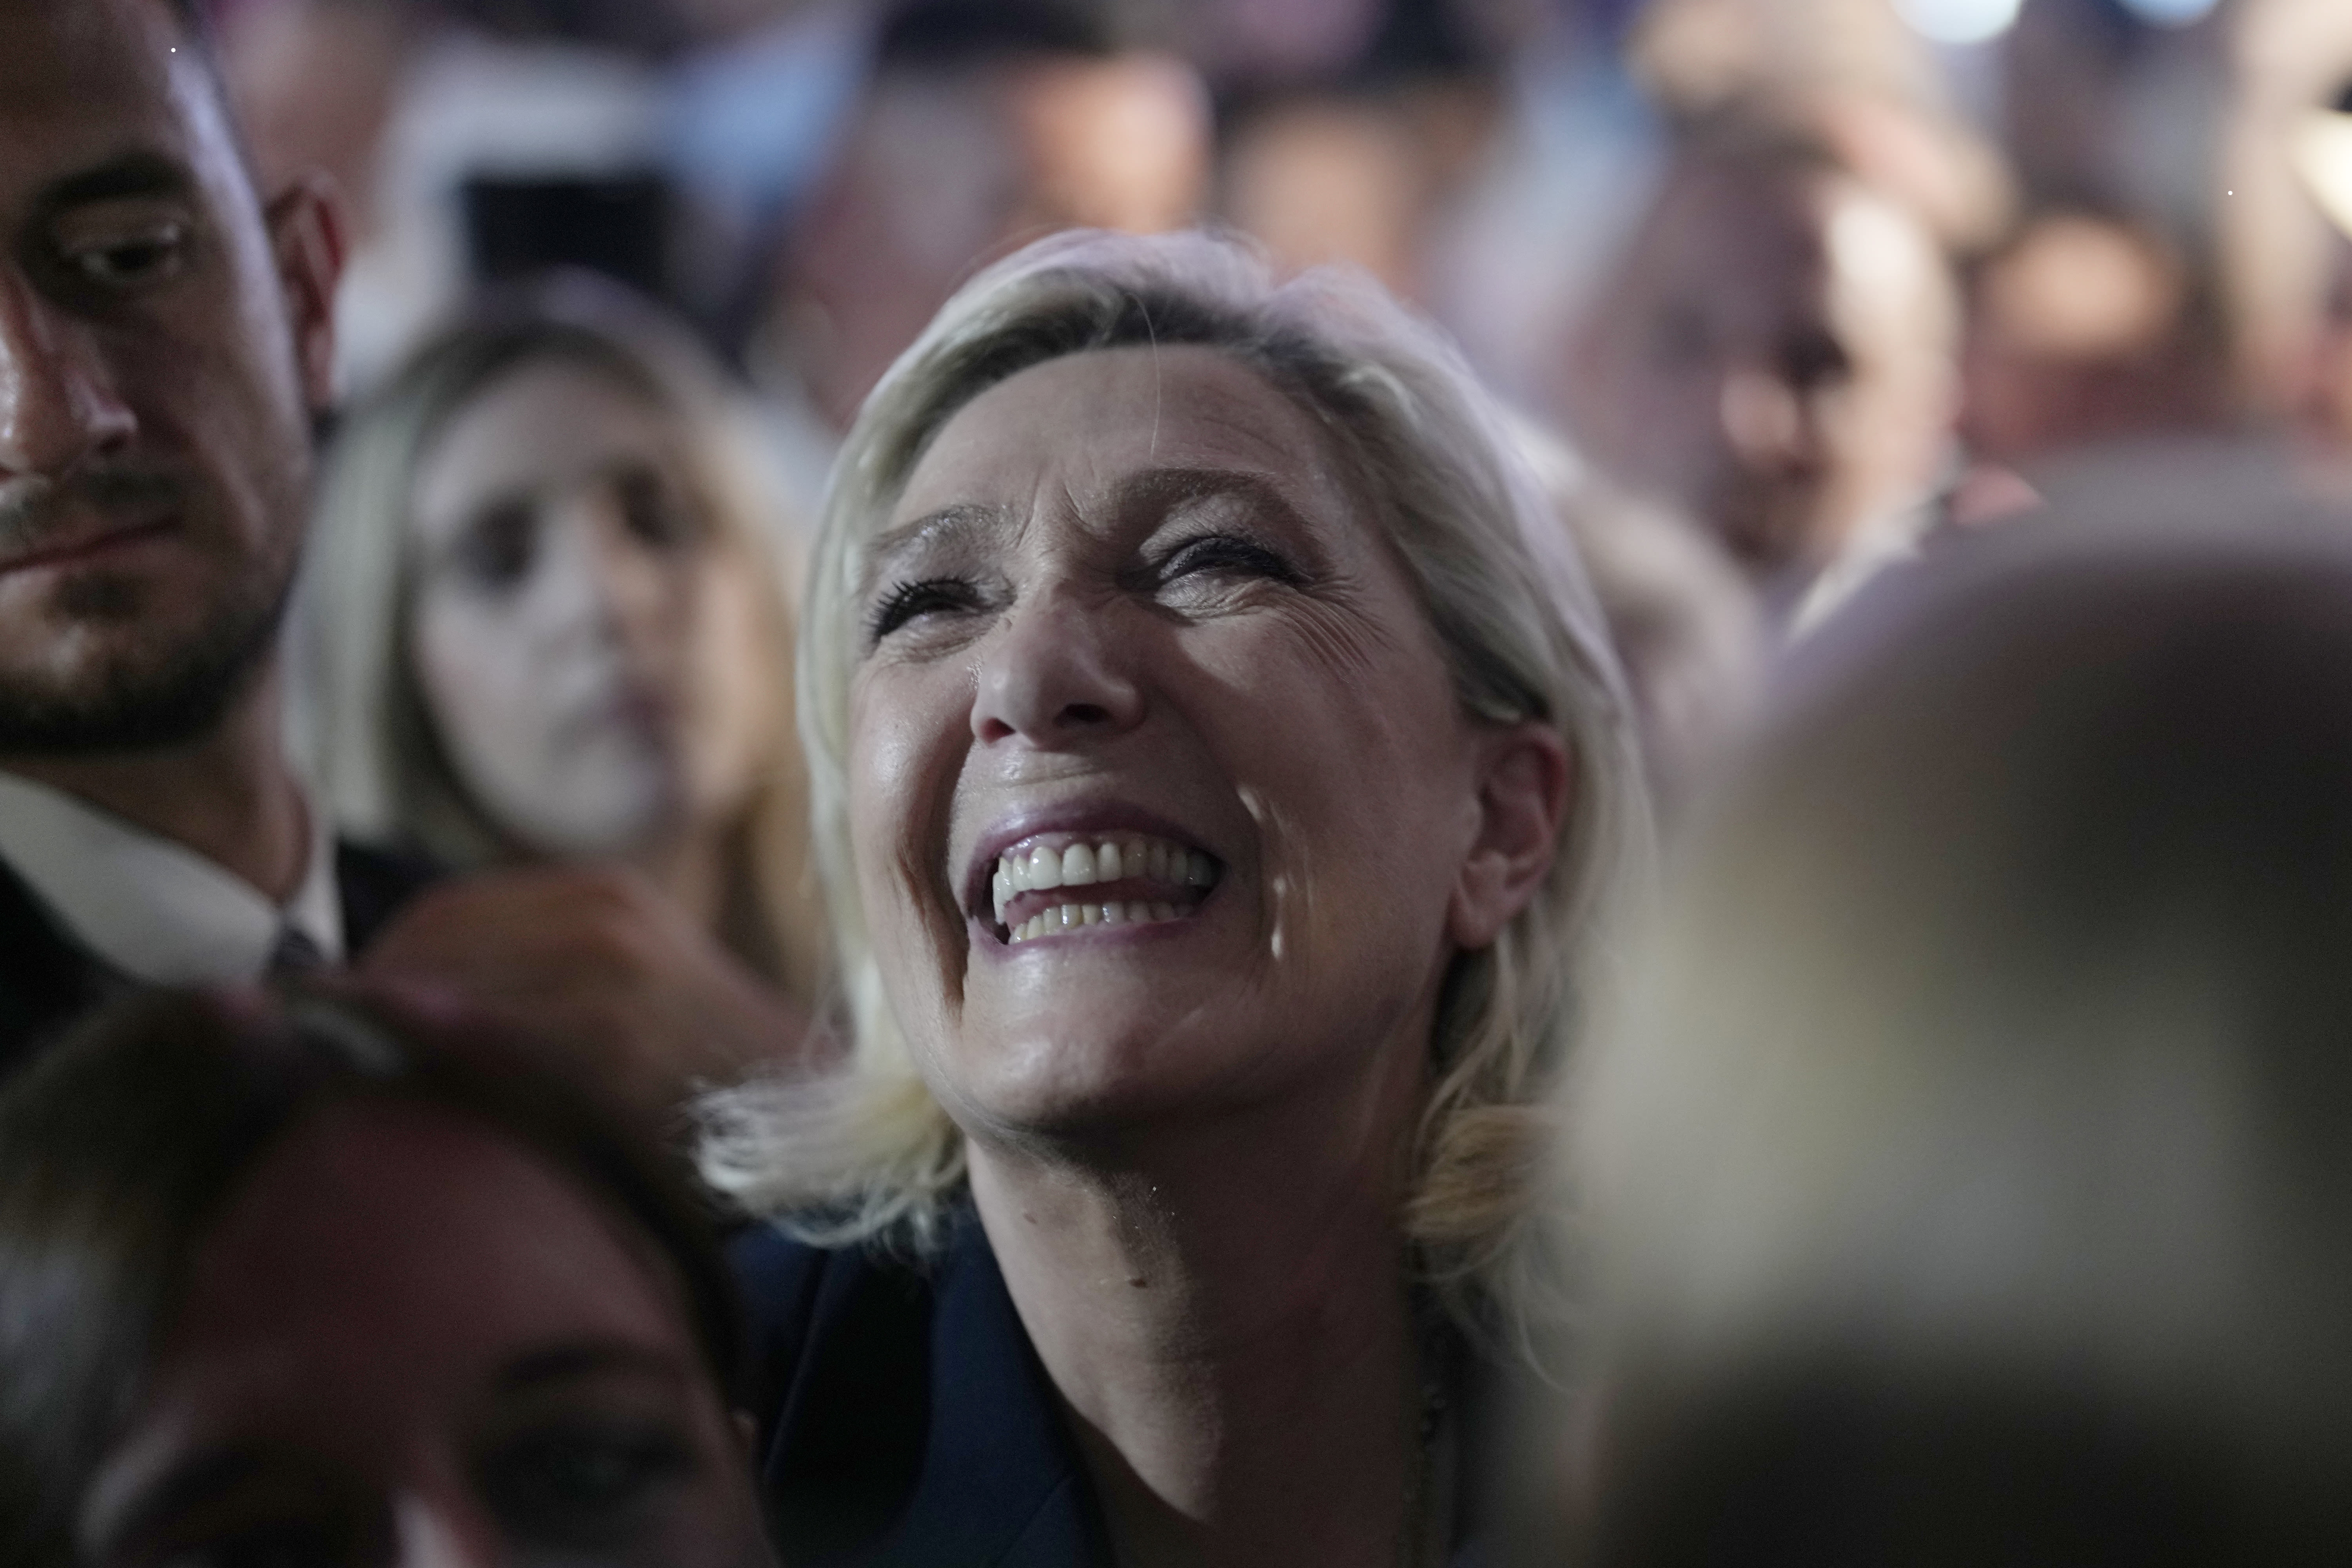 French far right ahead in 1st round of snap elections. Here's how runoff works and what comes next